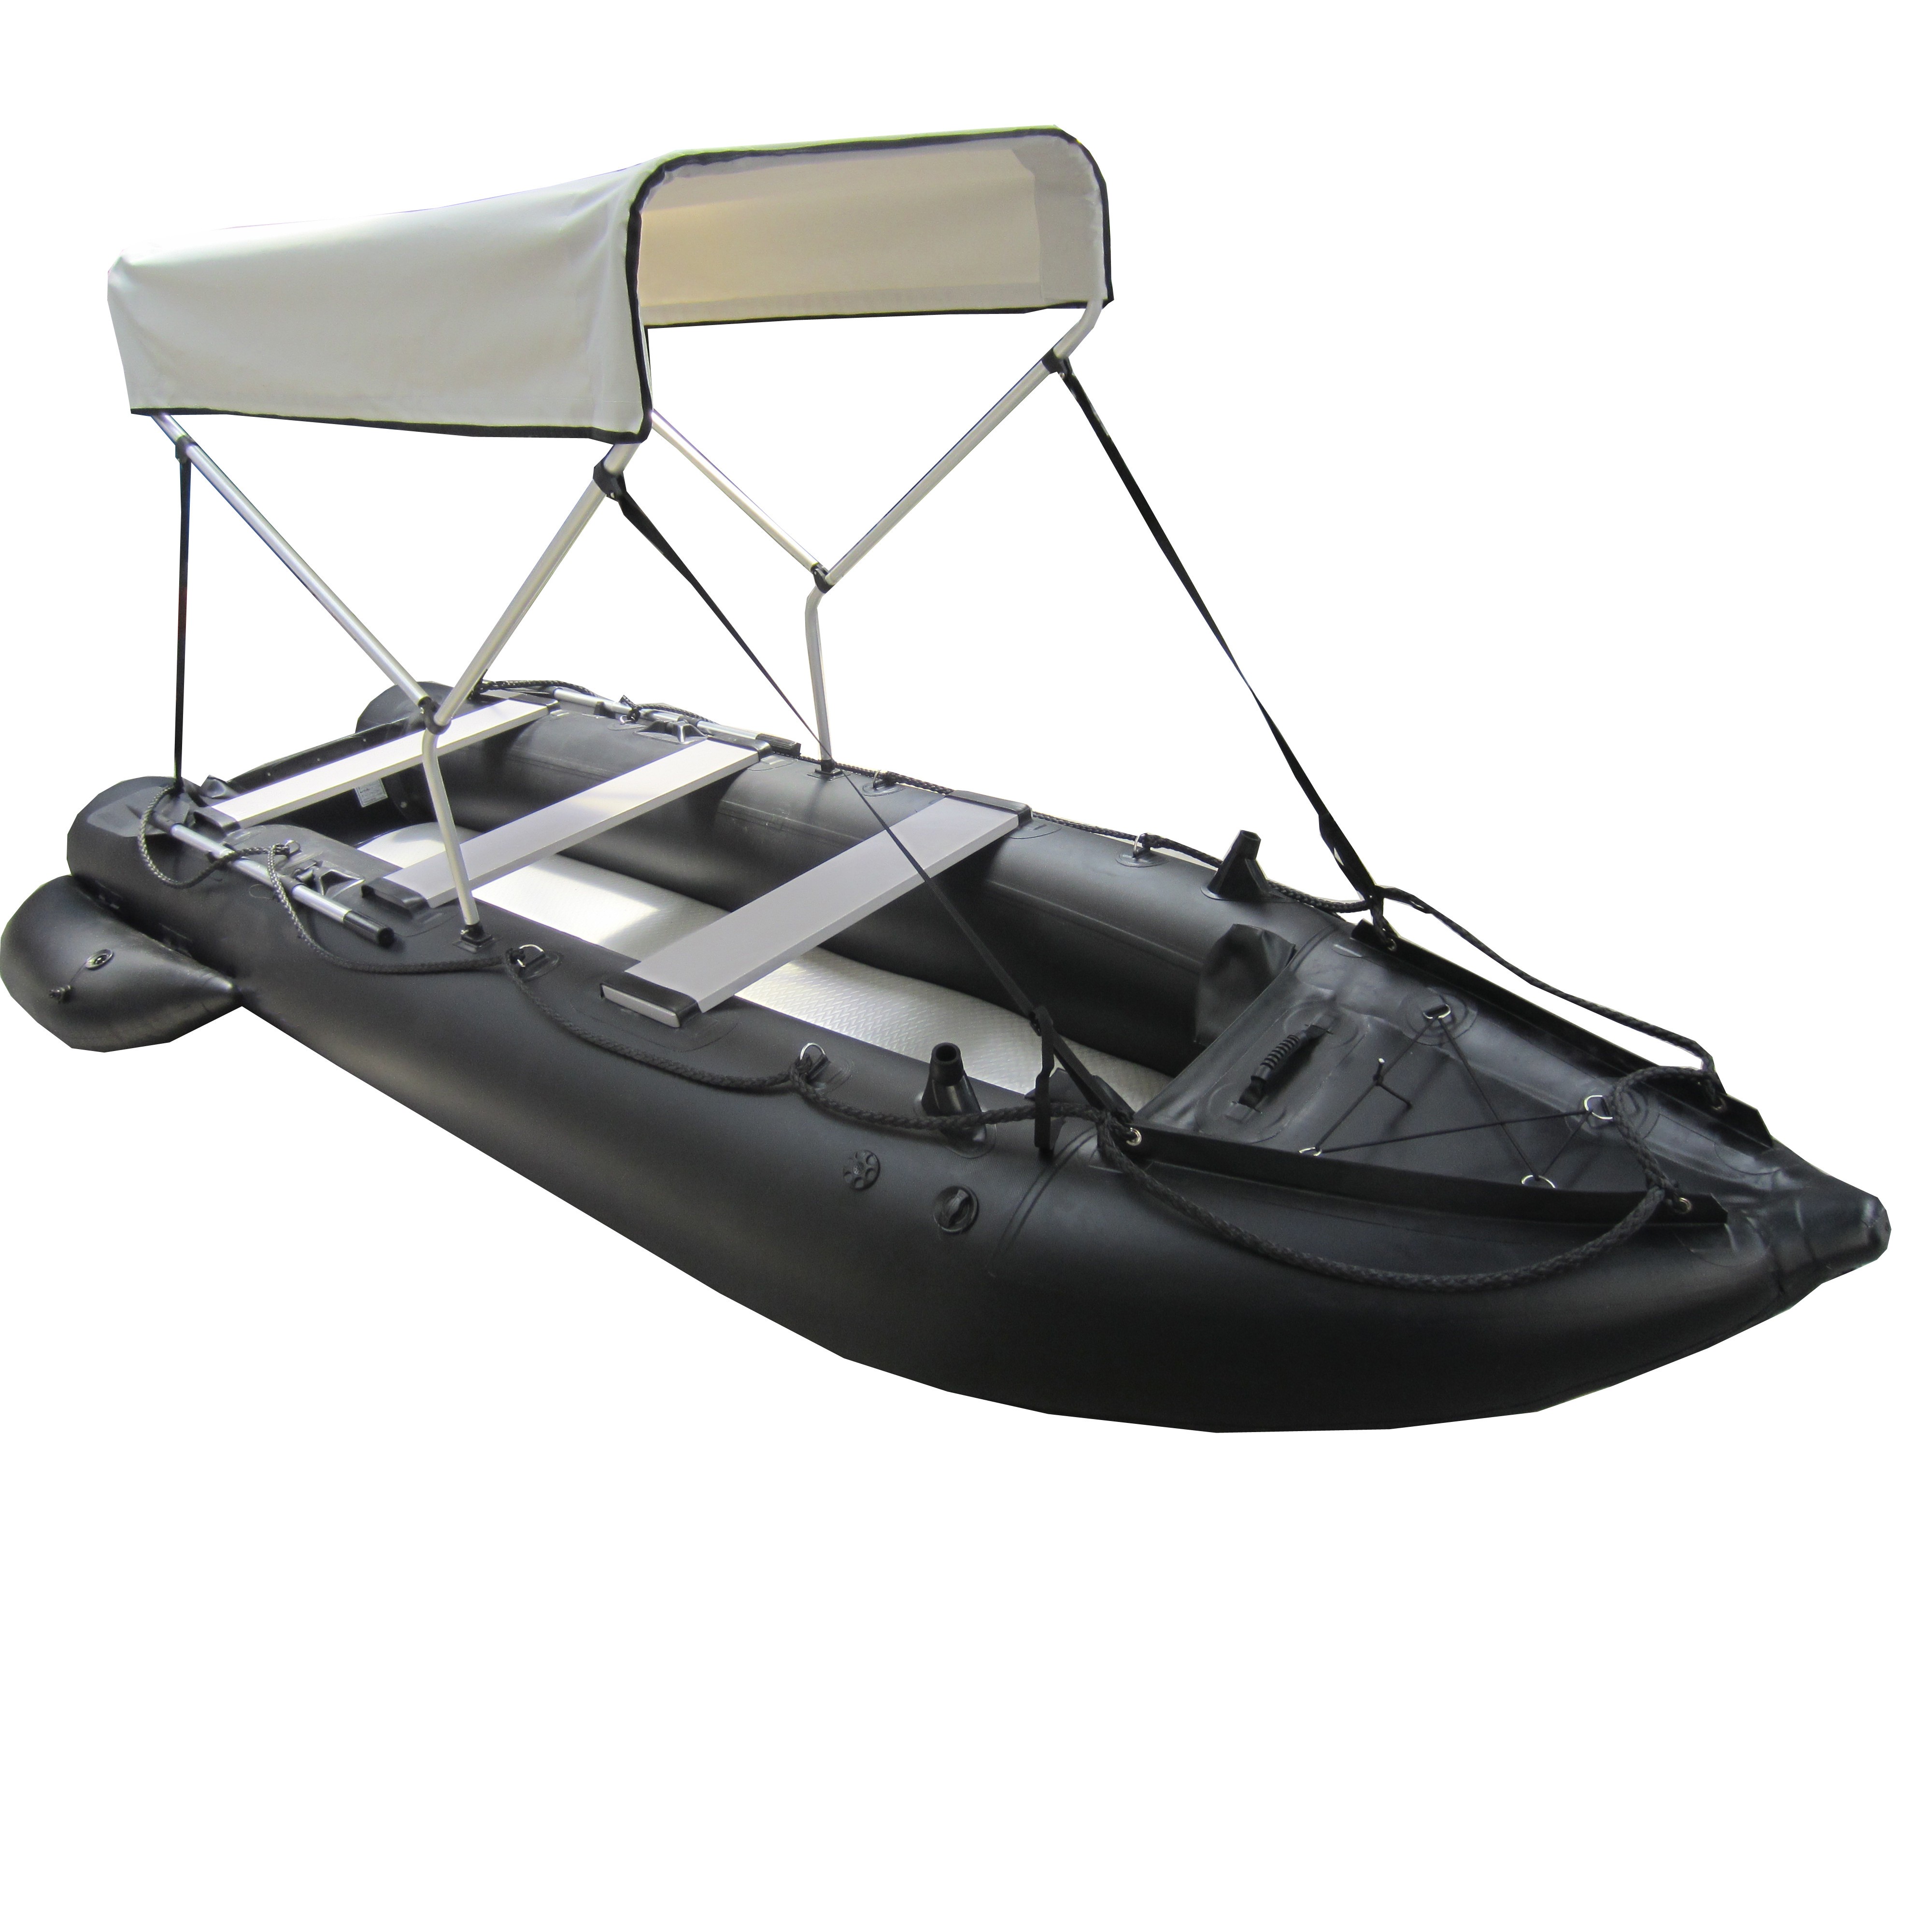 Inflatable sea kayak blue supplied from direct factory